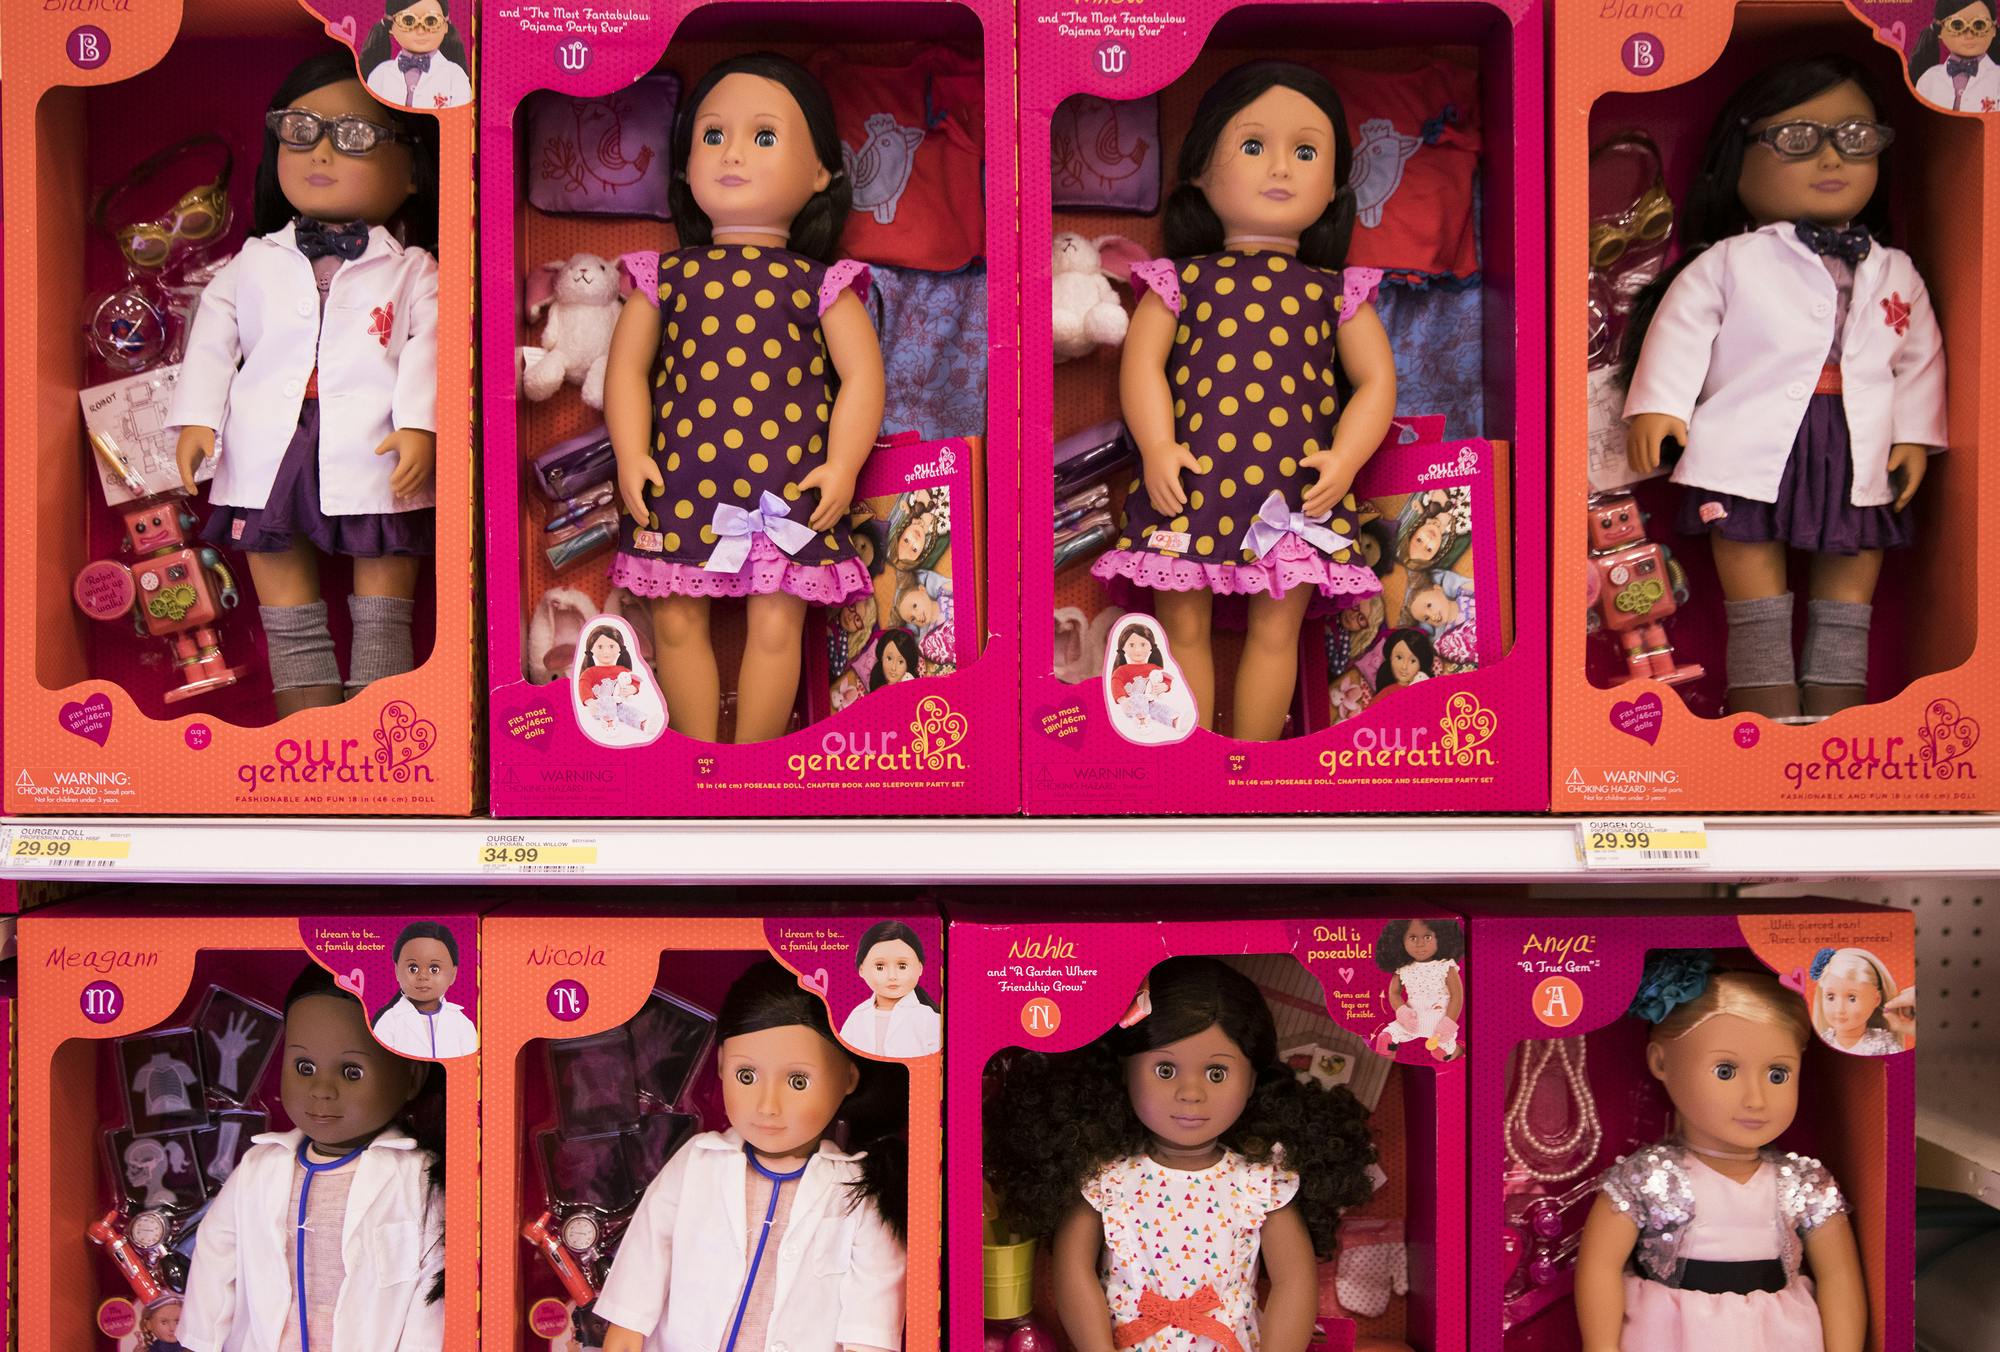 Multicultural dolls a hit for Target and other retailers